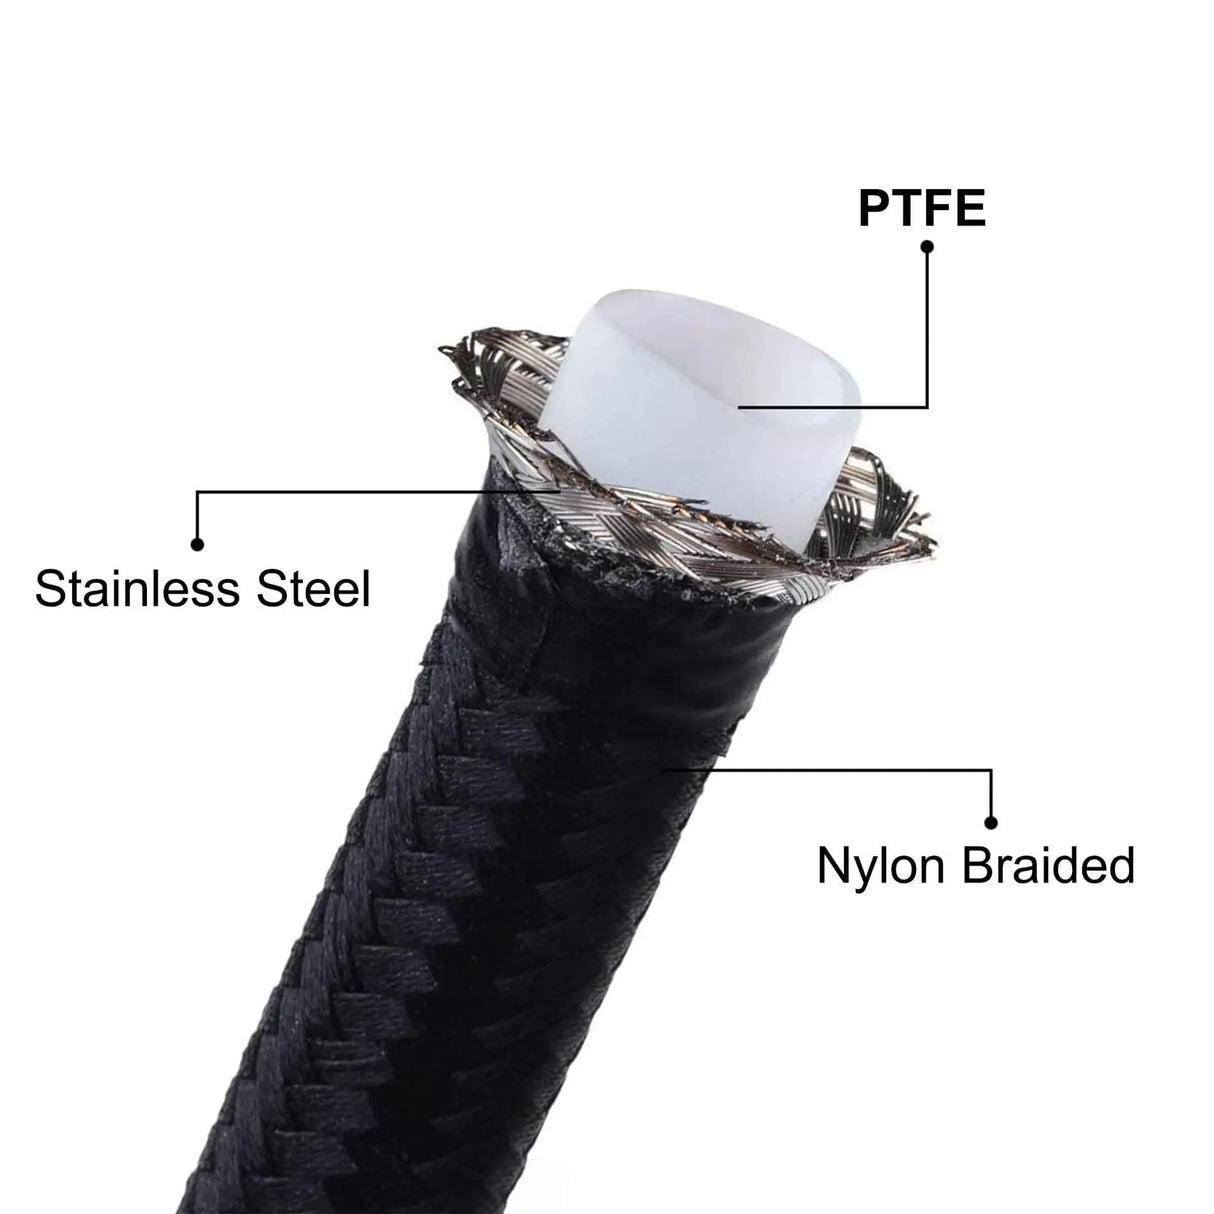 Performance Fuel Line Kit - 12 AN (3/4) 20FT Stainless Steel Braided Fuel  Gas E85 Oil Line Hose : Automotive 